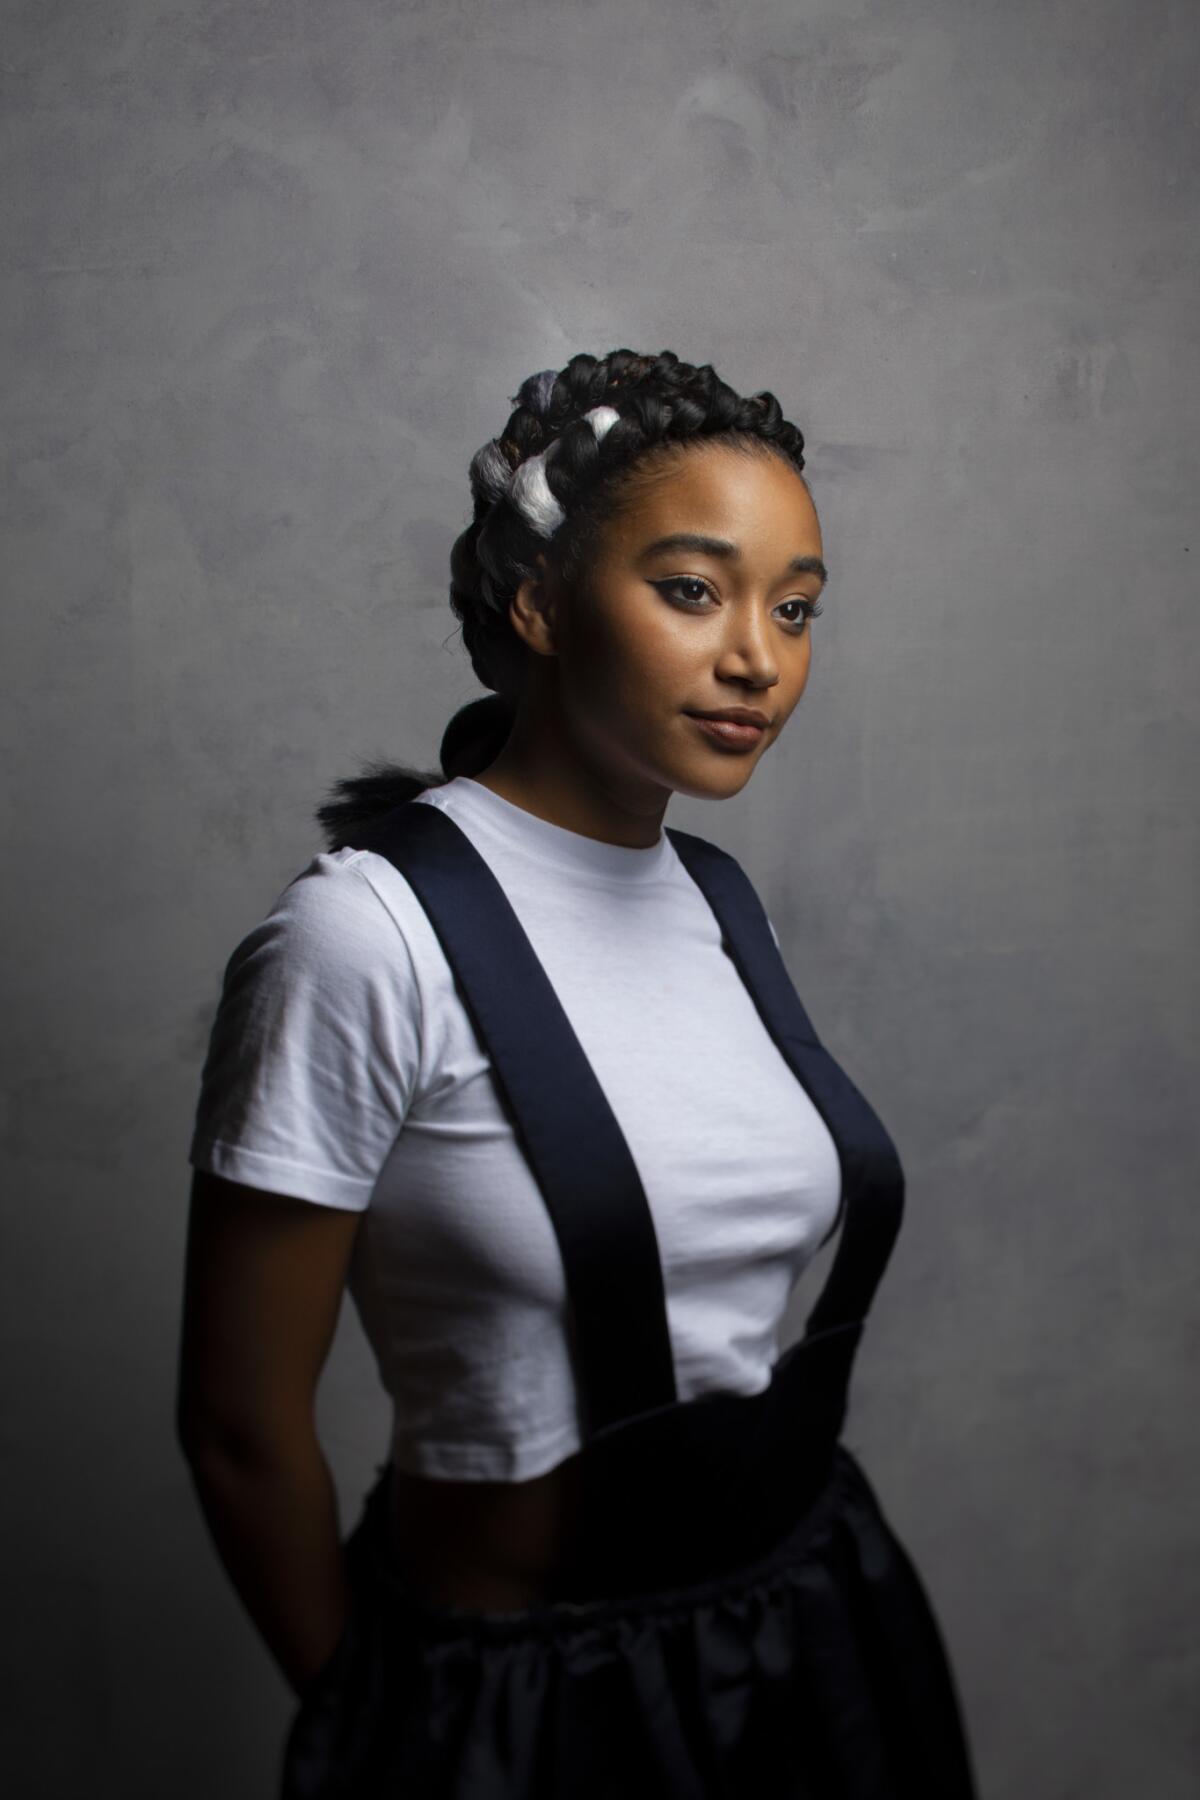 Actress Amandla Stenberg from the film "The Hate U Give."